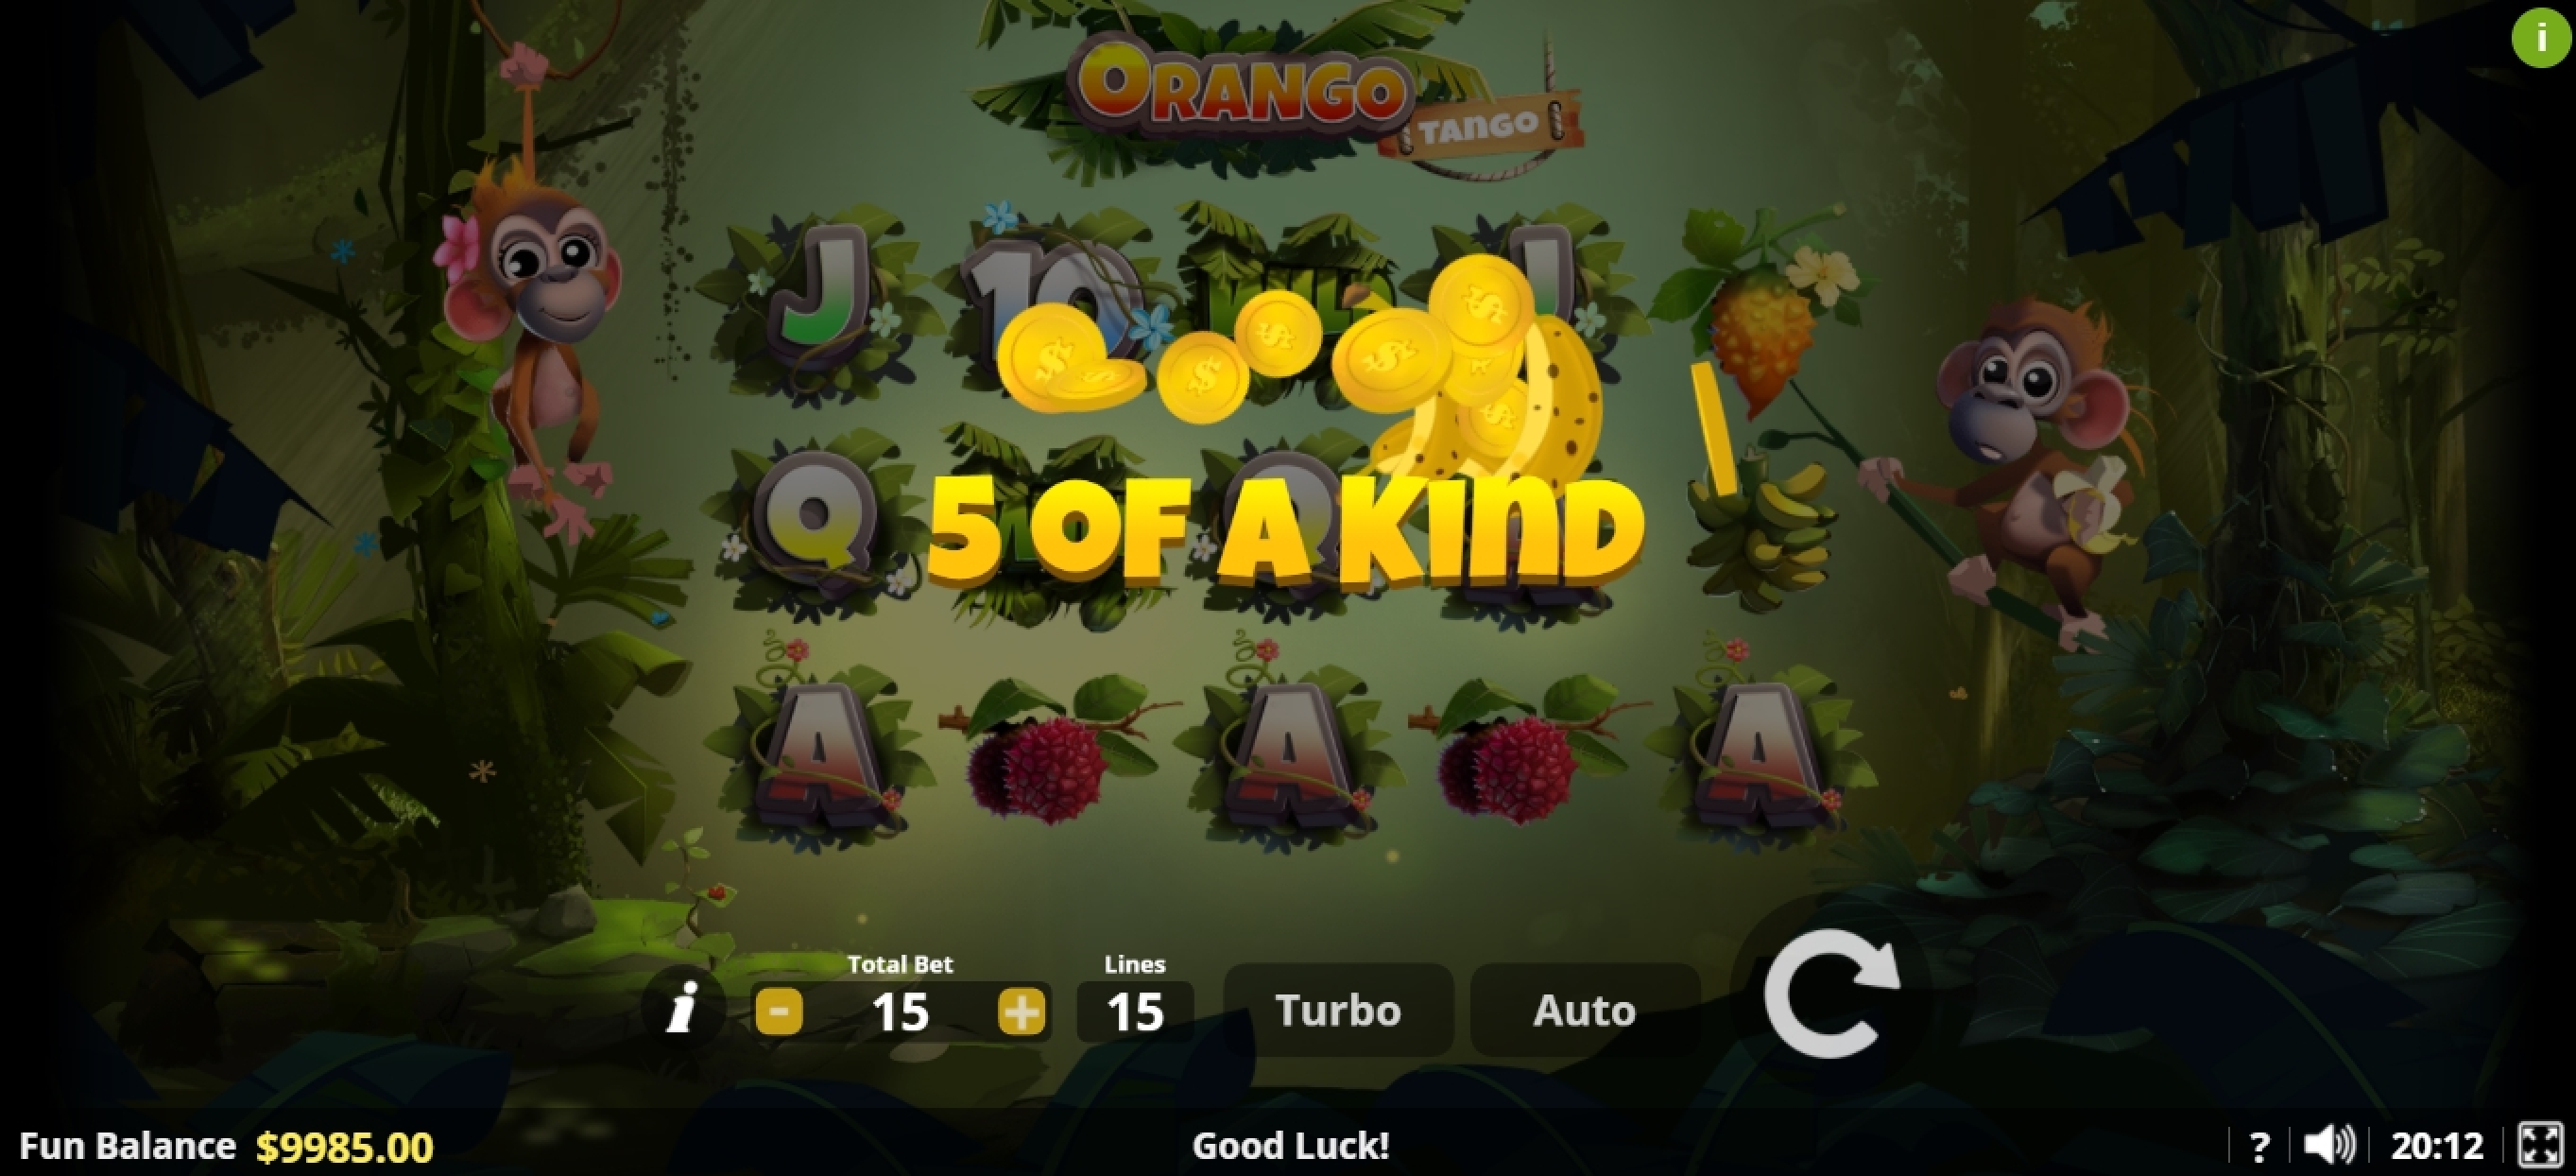 Win Money in Orango Tango Free Slot Game by Lady Luck Games